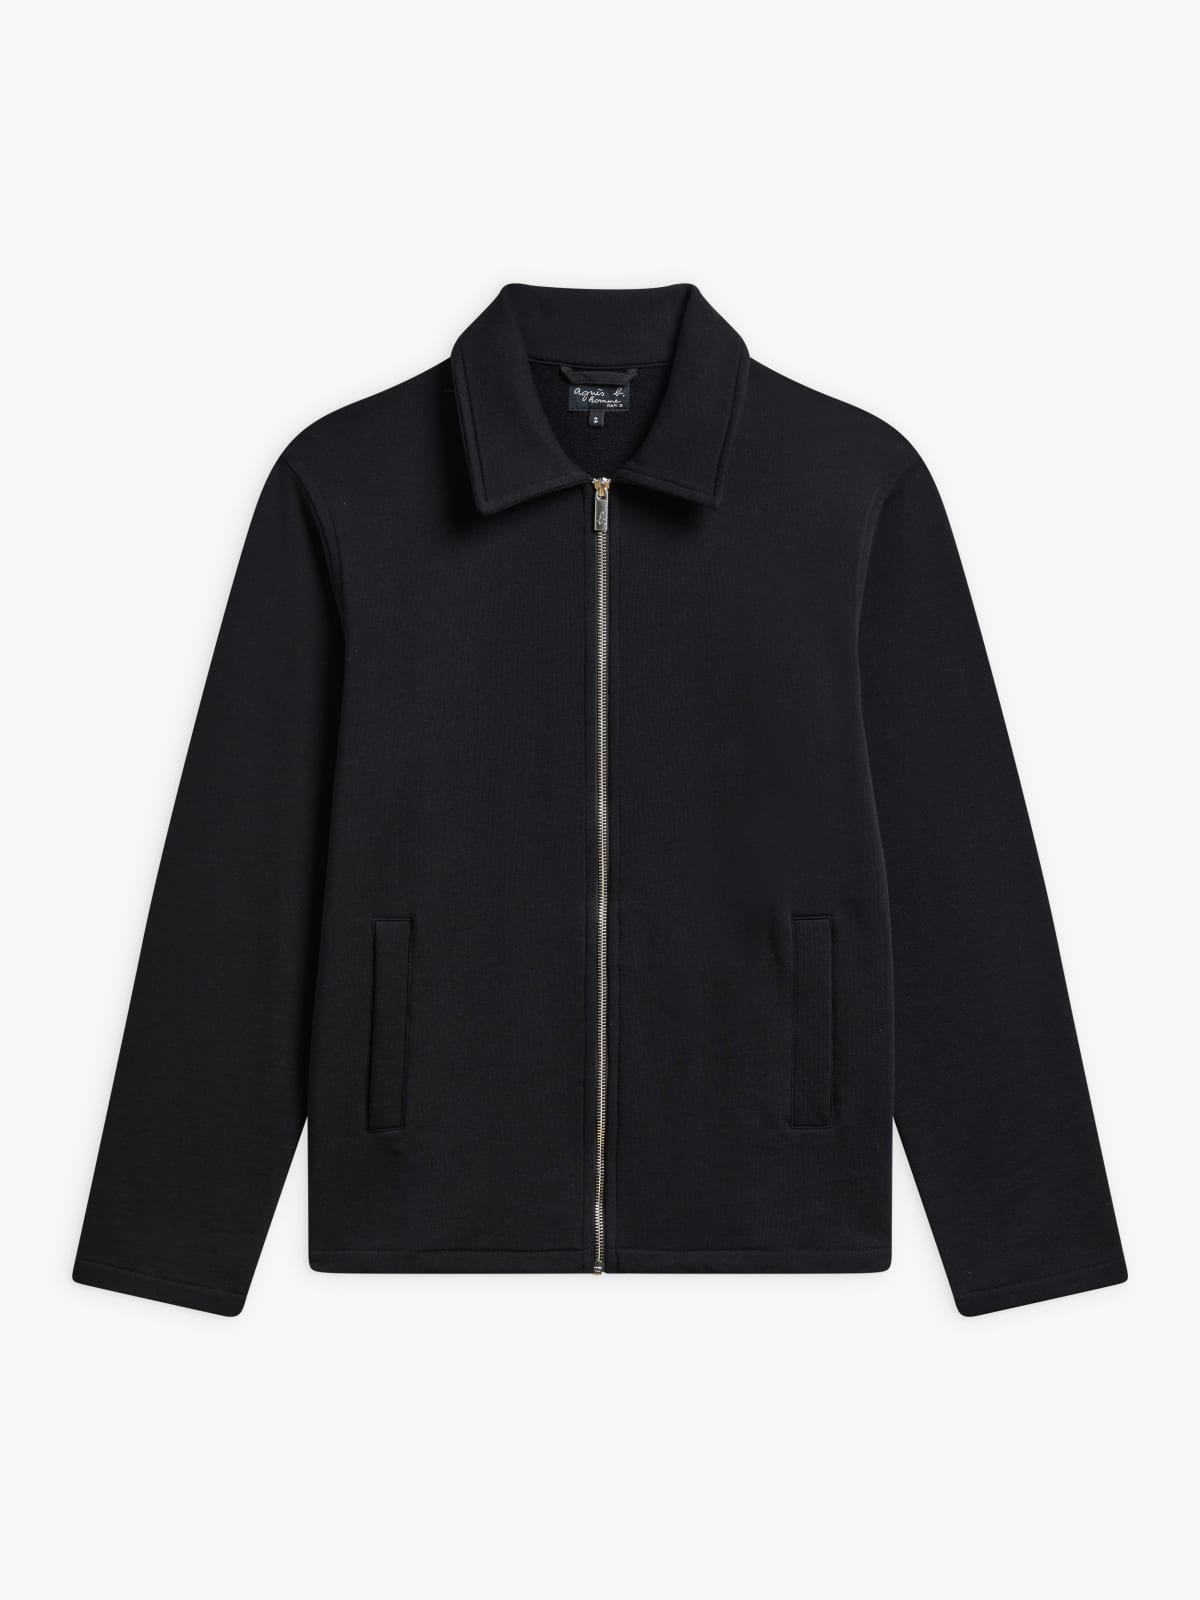 black Purcell cotton jersey jacket